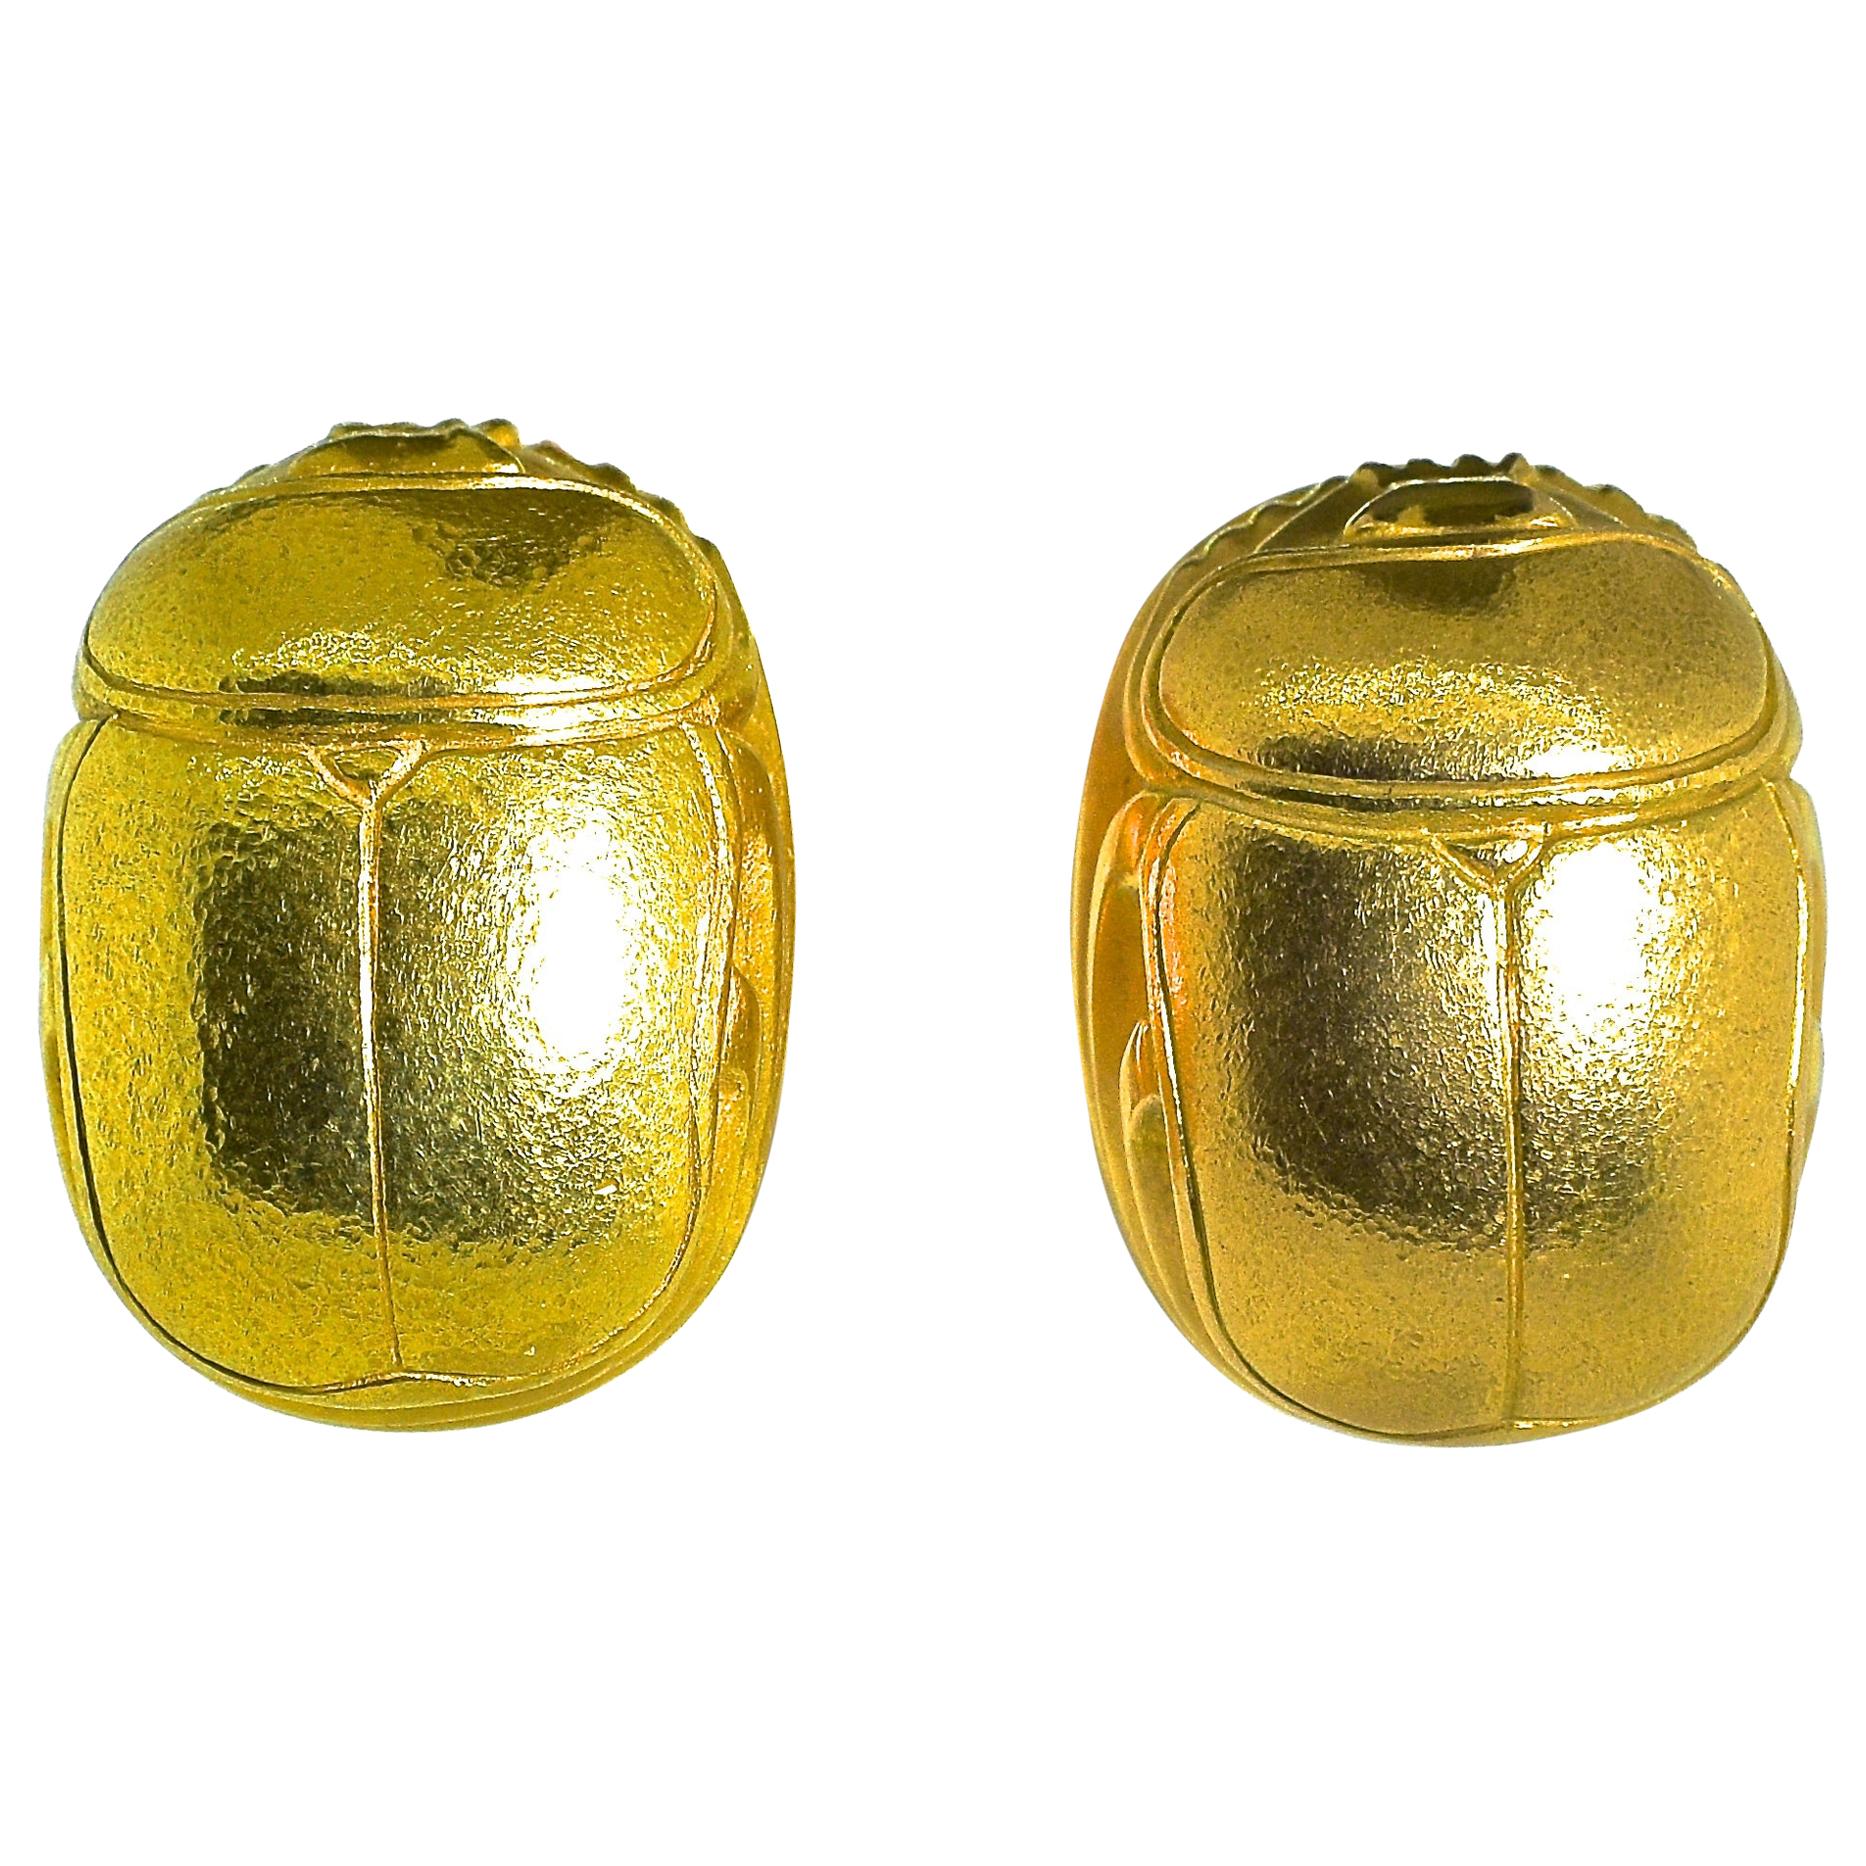 18K yellow gold earrings - robust and unusual - they cover the ear lobe with 1 inch by 3/4 inch of bright 18K yellow gold drafted in the classic image of a scarab - long life.  So referred by the ancient Egyptians that the Pharaoh's  final resting